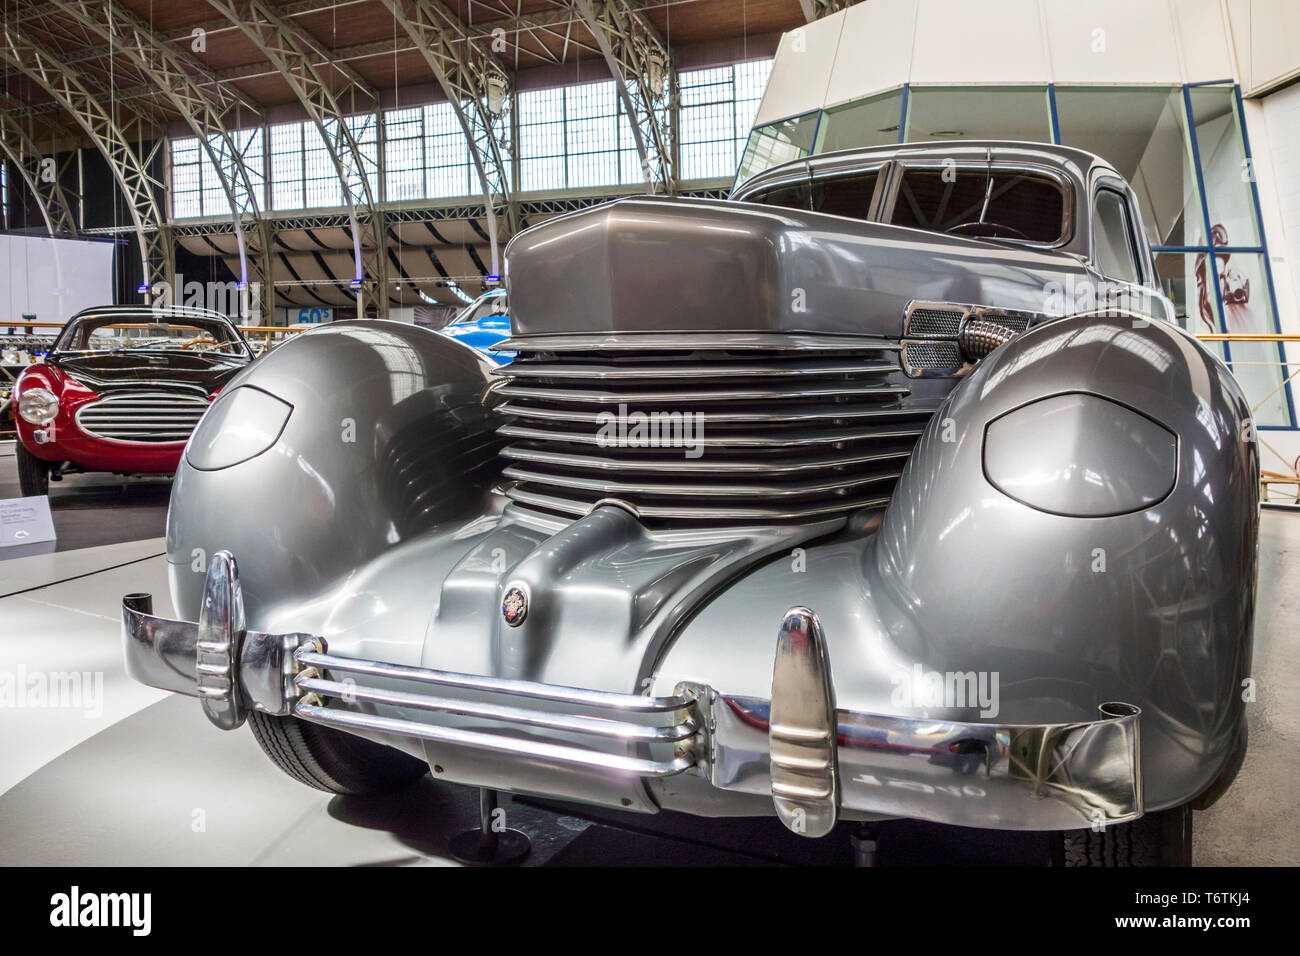 1937 Cord Type 812, American luxury car produced by Cord Automobile at Autoworld, oldtimer museum in Brussels, Belgium Stock Photo